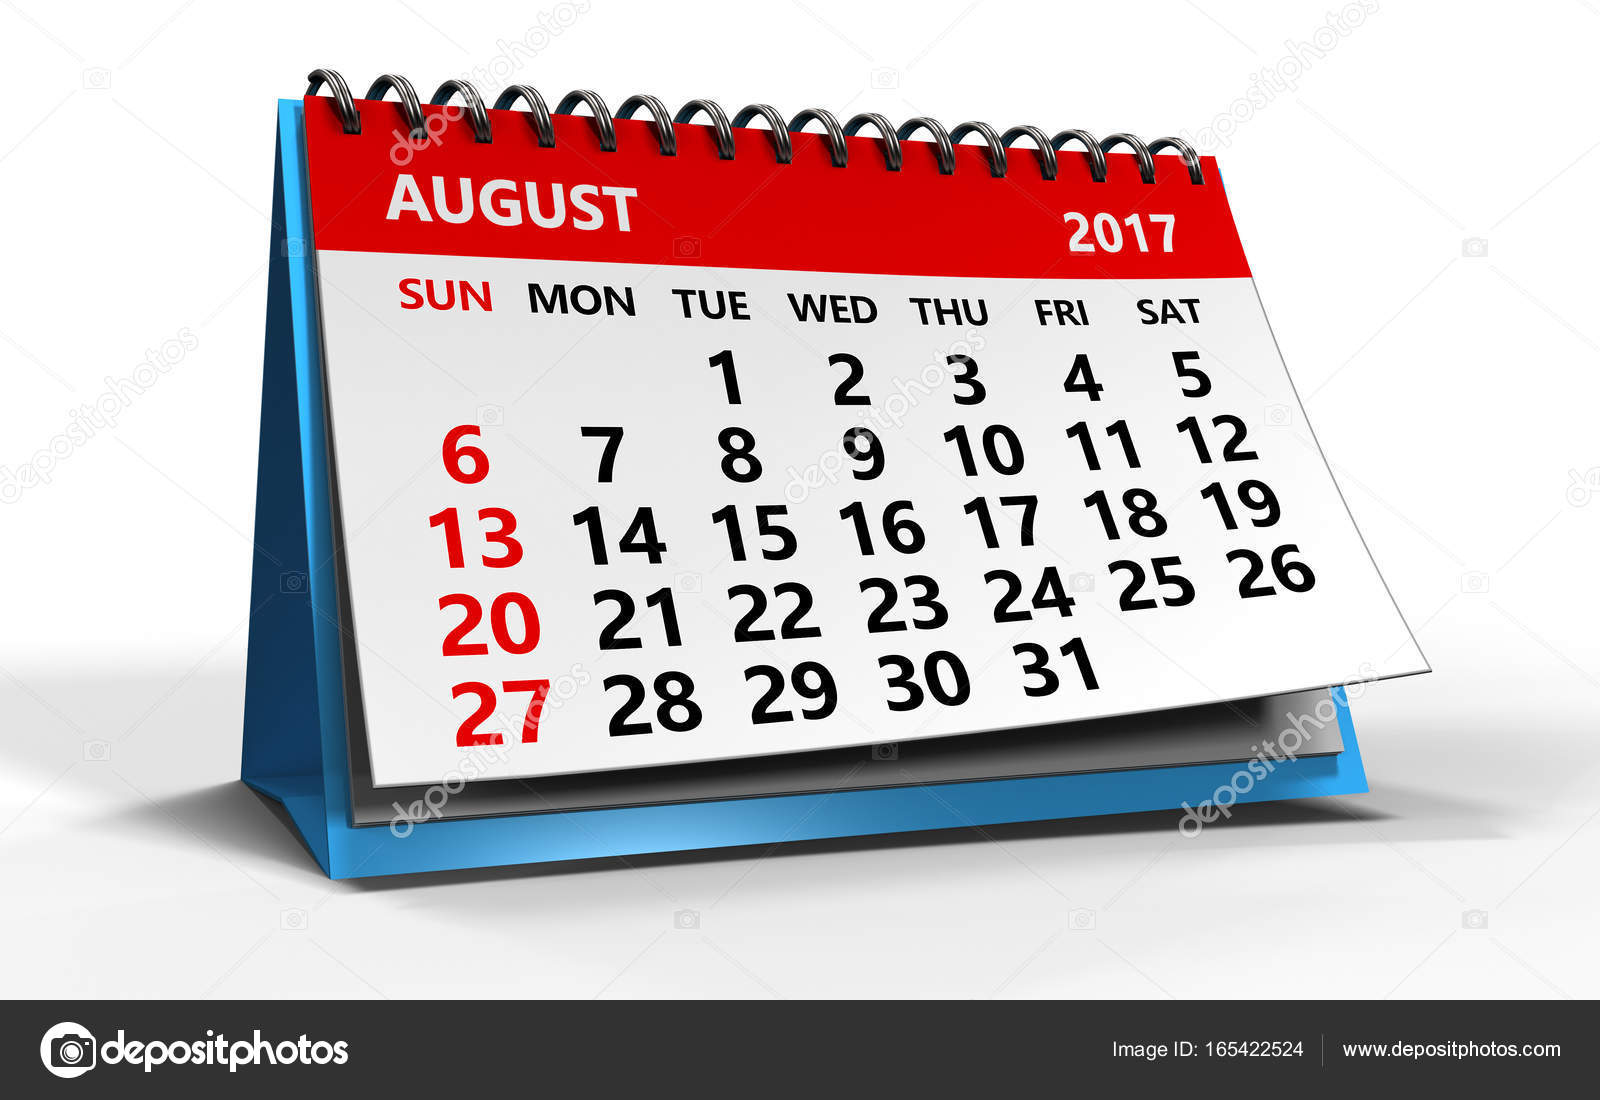 Illustration of august calendar Stock Photo by ©mmaxer 165422524